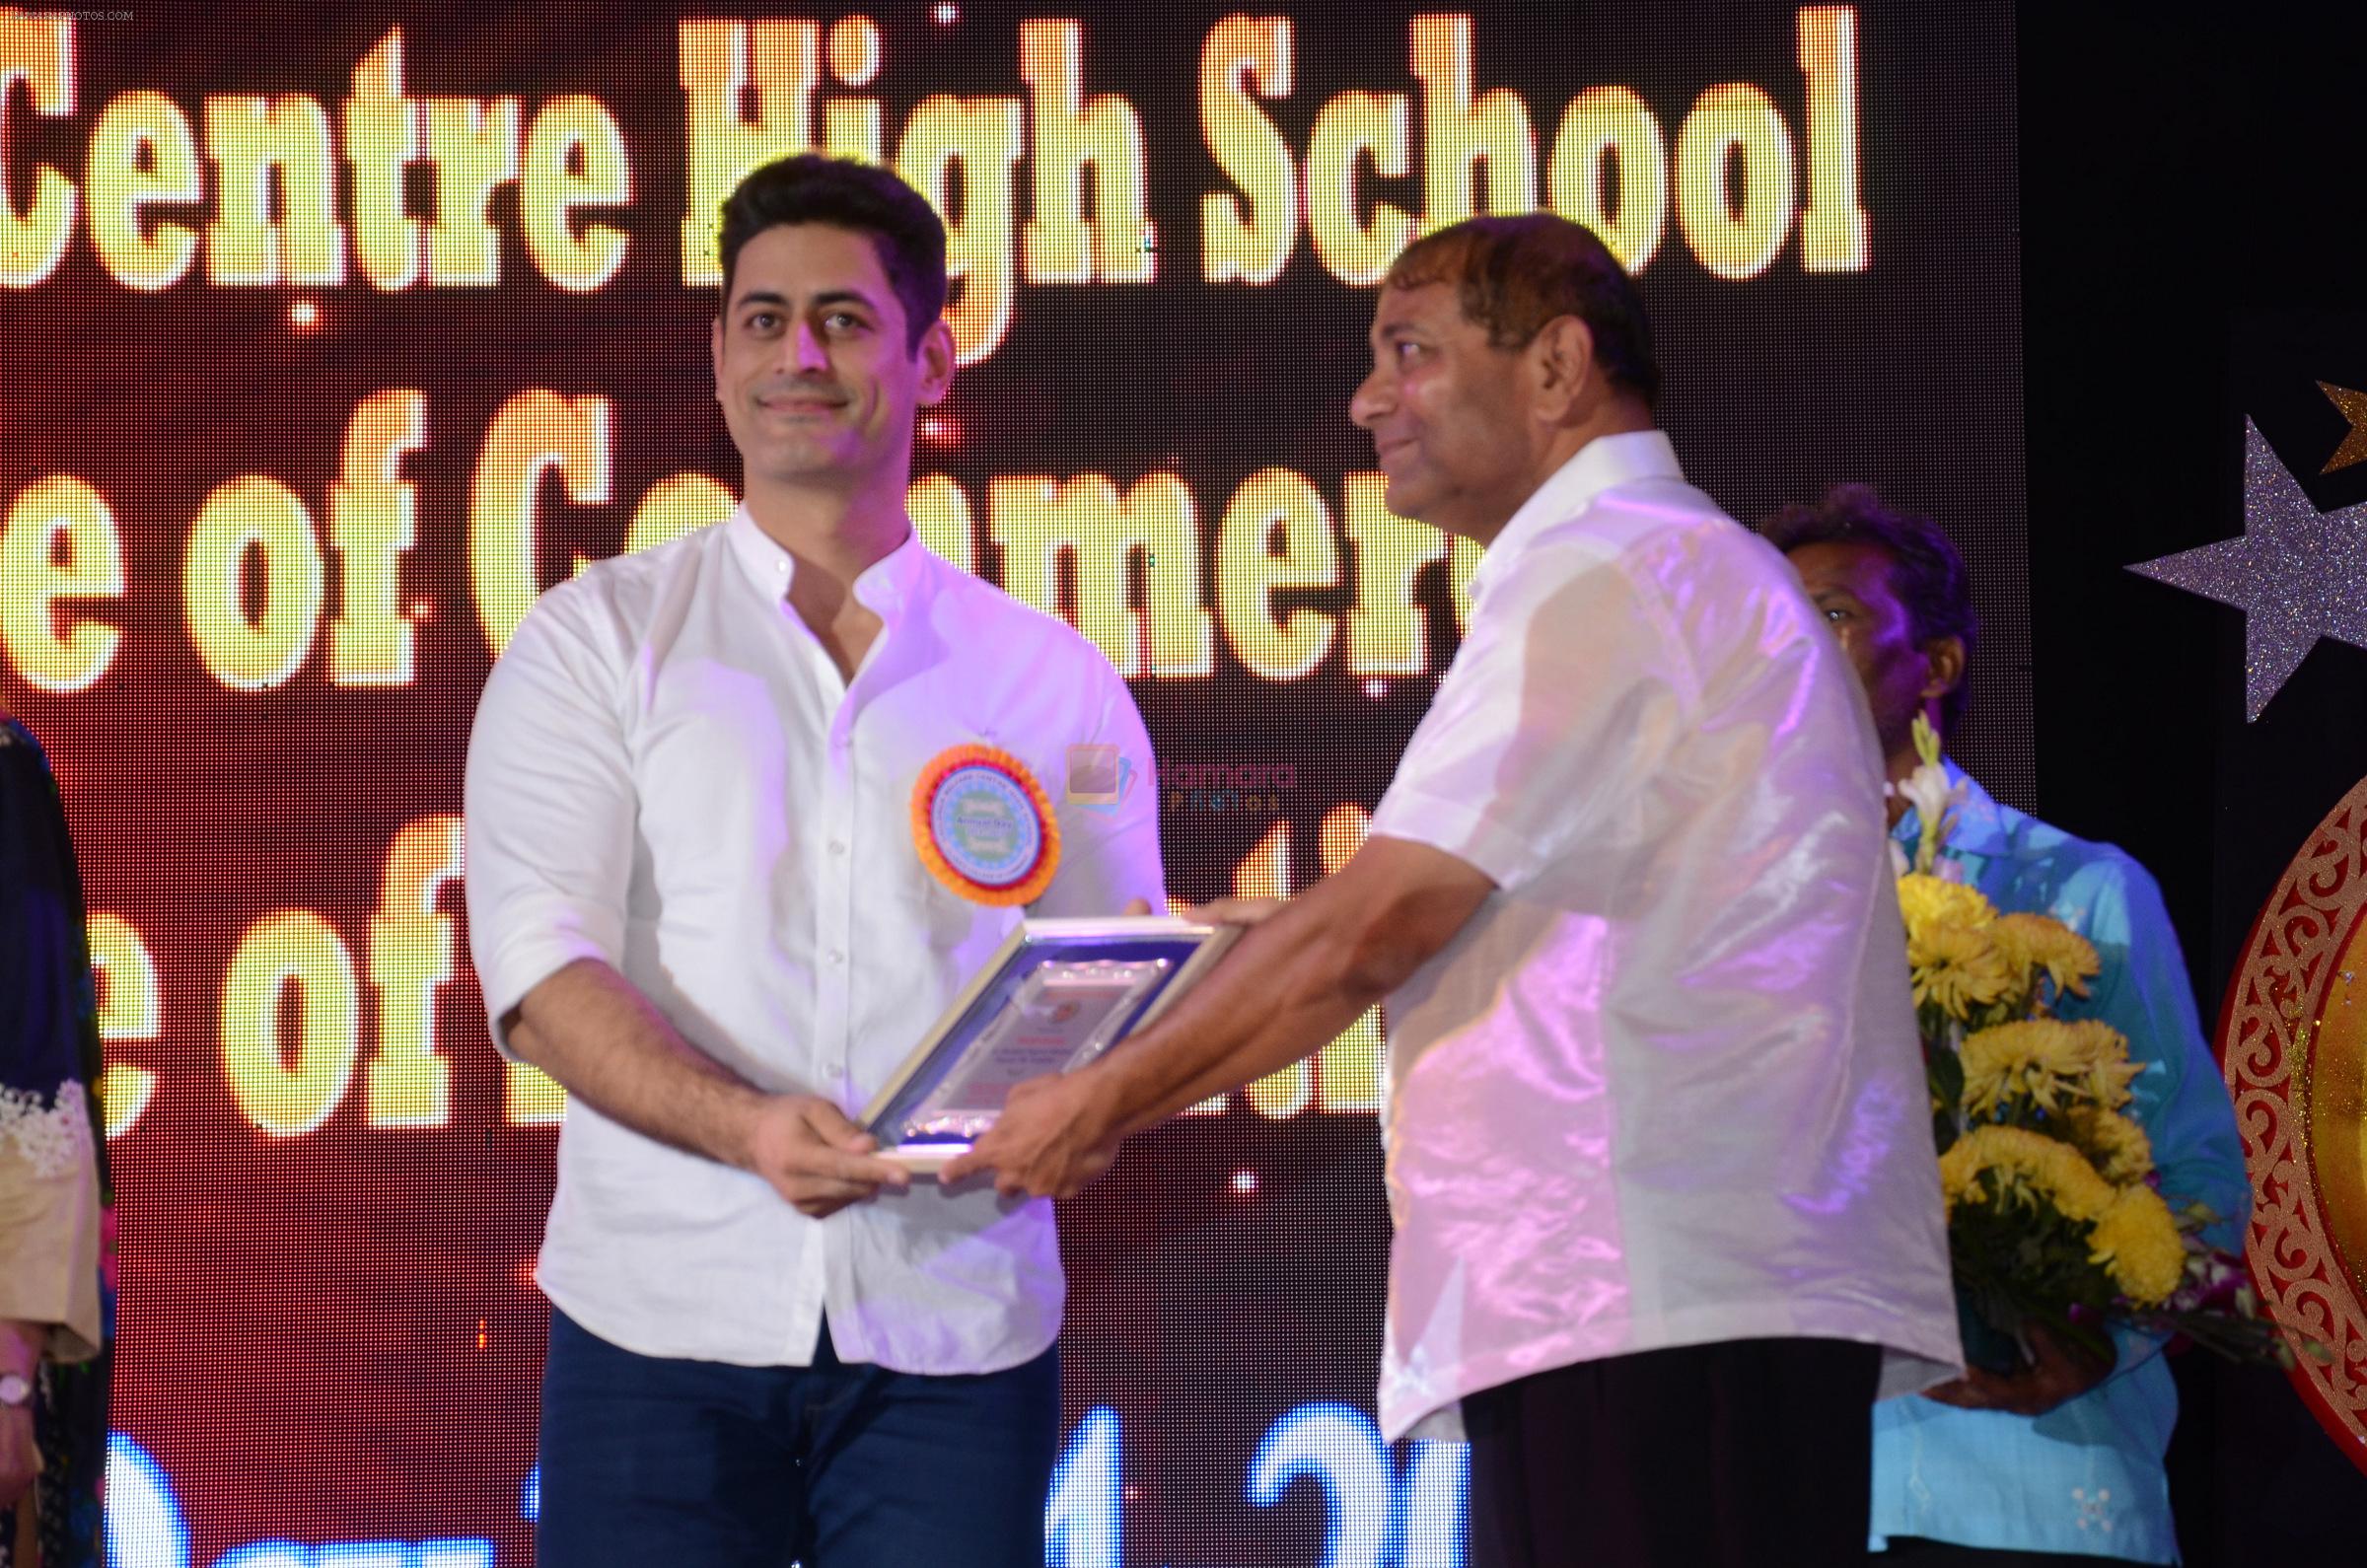 Ajay Kaul with Mohit Raina at the 34th Annual Day Celebration and Prize Distribution Ceremony of Children�s Welfare Centre High School on 14th Feb 2015